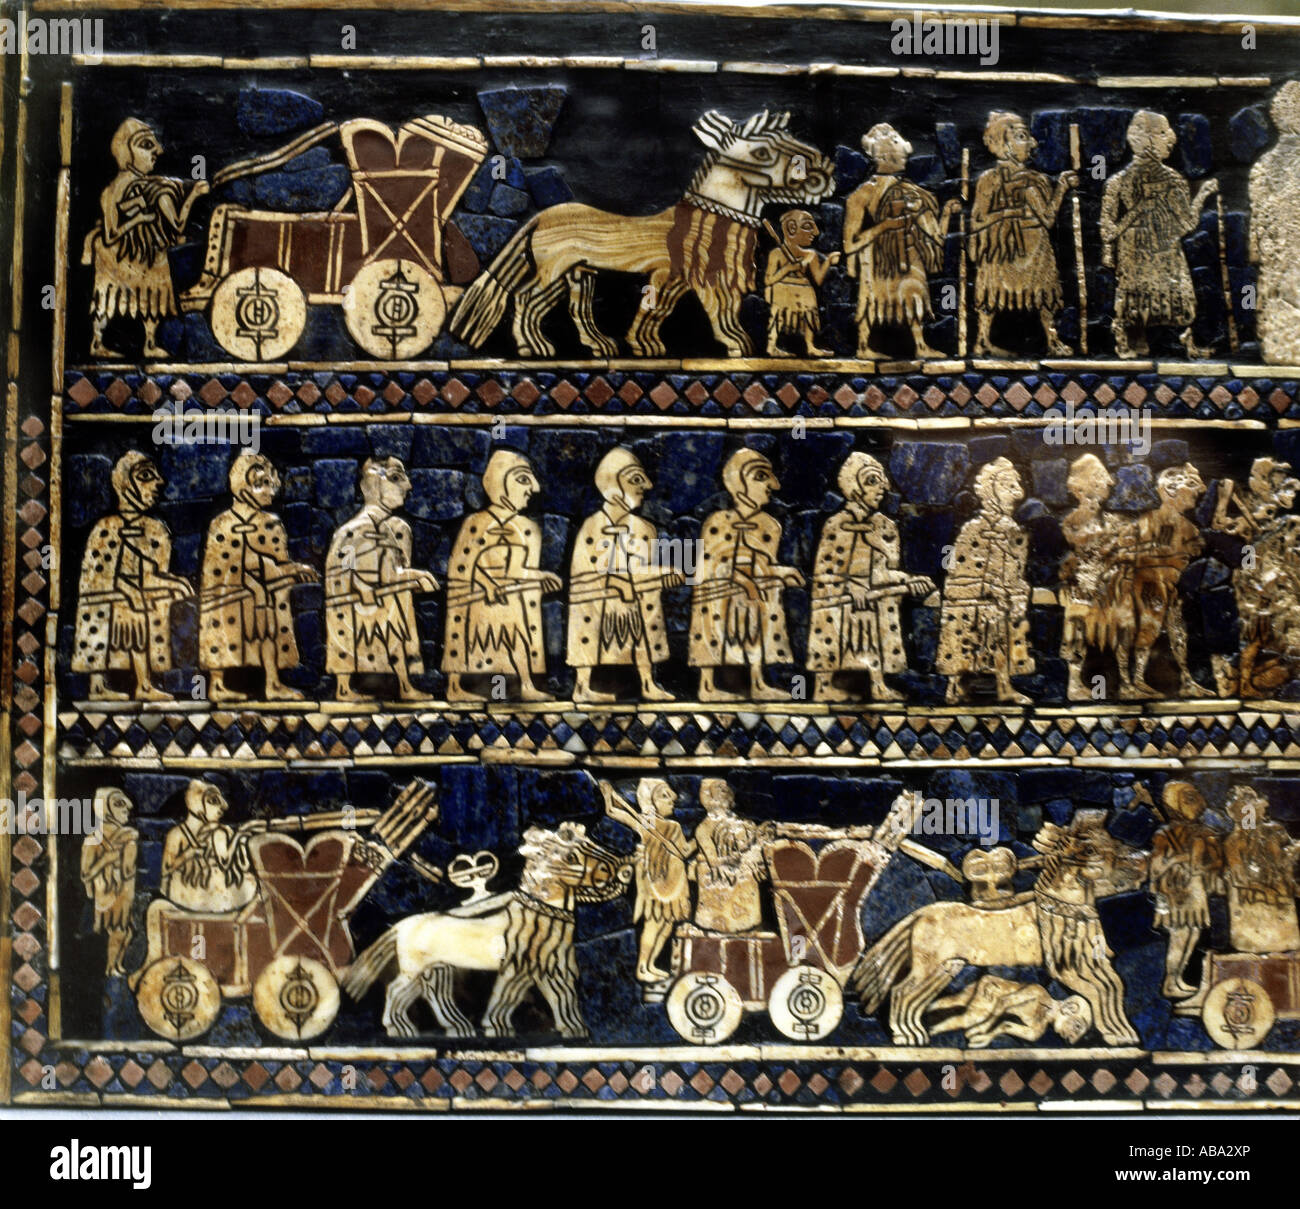 ancient world, Mesopotamia, Sumer, mosaic, Standard of Ur, left side, "war  side", royal tomb 779, early dynastic period, 2850 - 2350 BC, British  Museum, London Stock Photo - Alamy